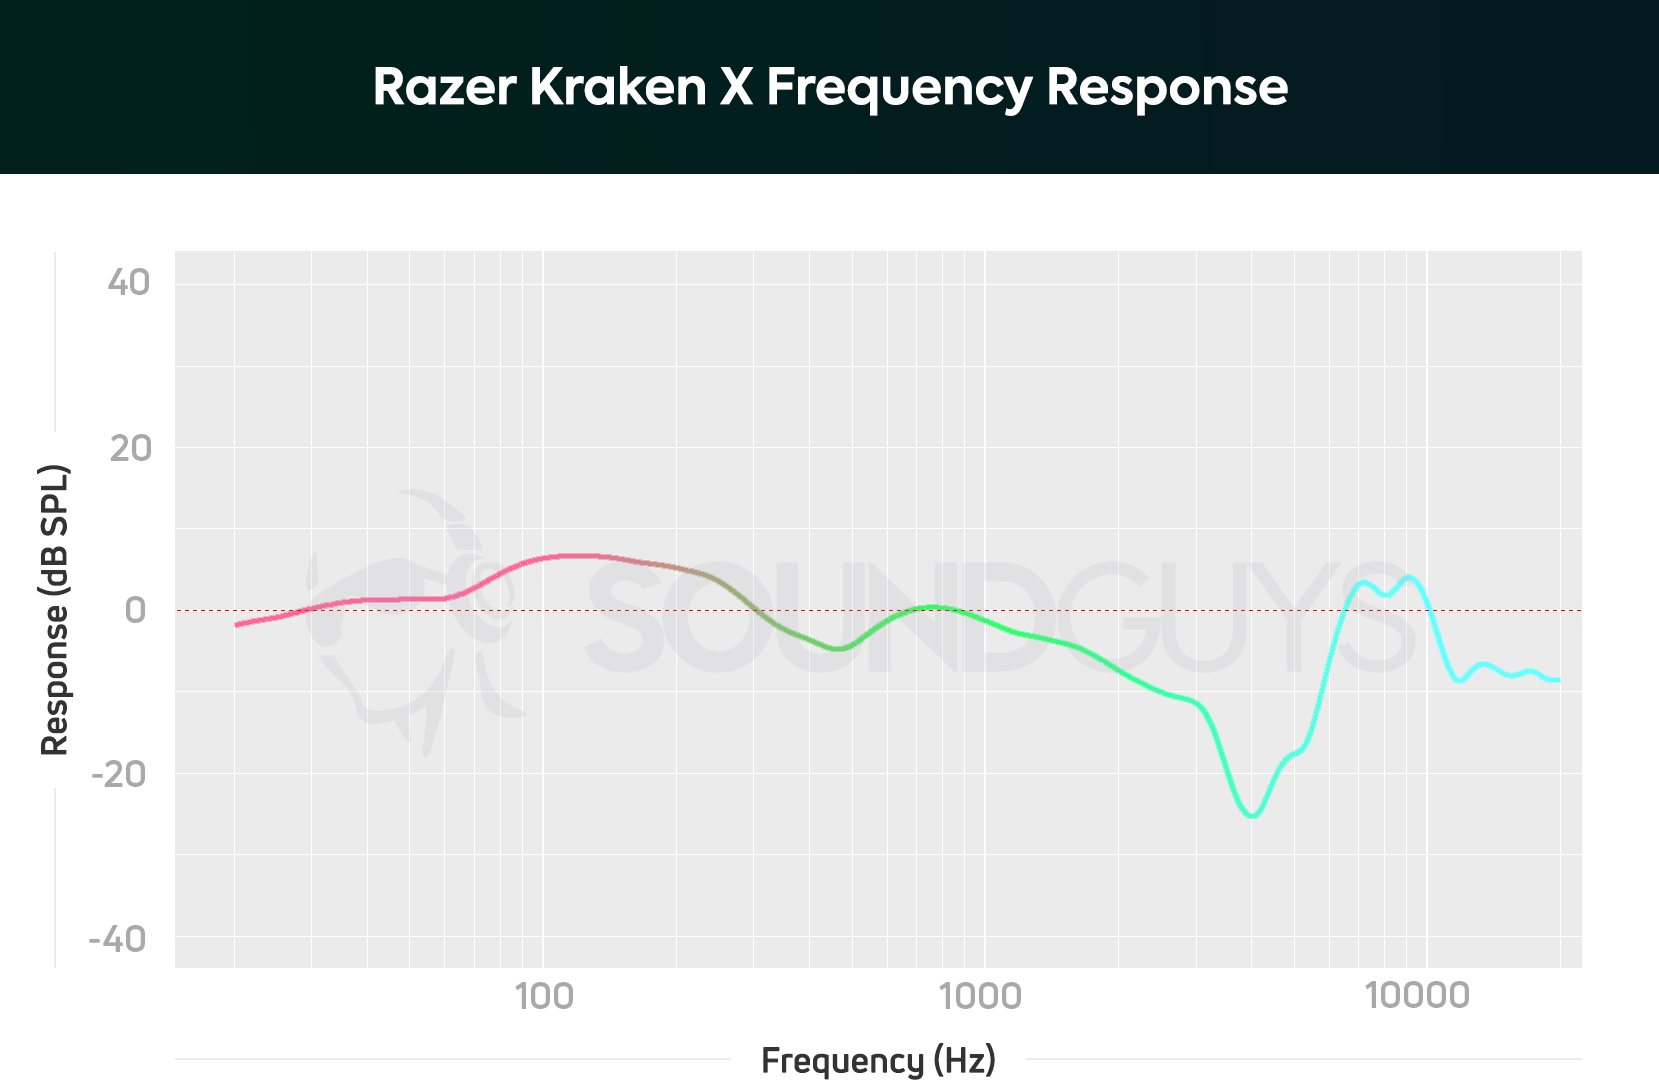 Frequency response chart for the Razer Kraken X gaming headset, depicting amplified bass notes.